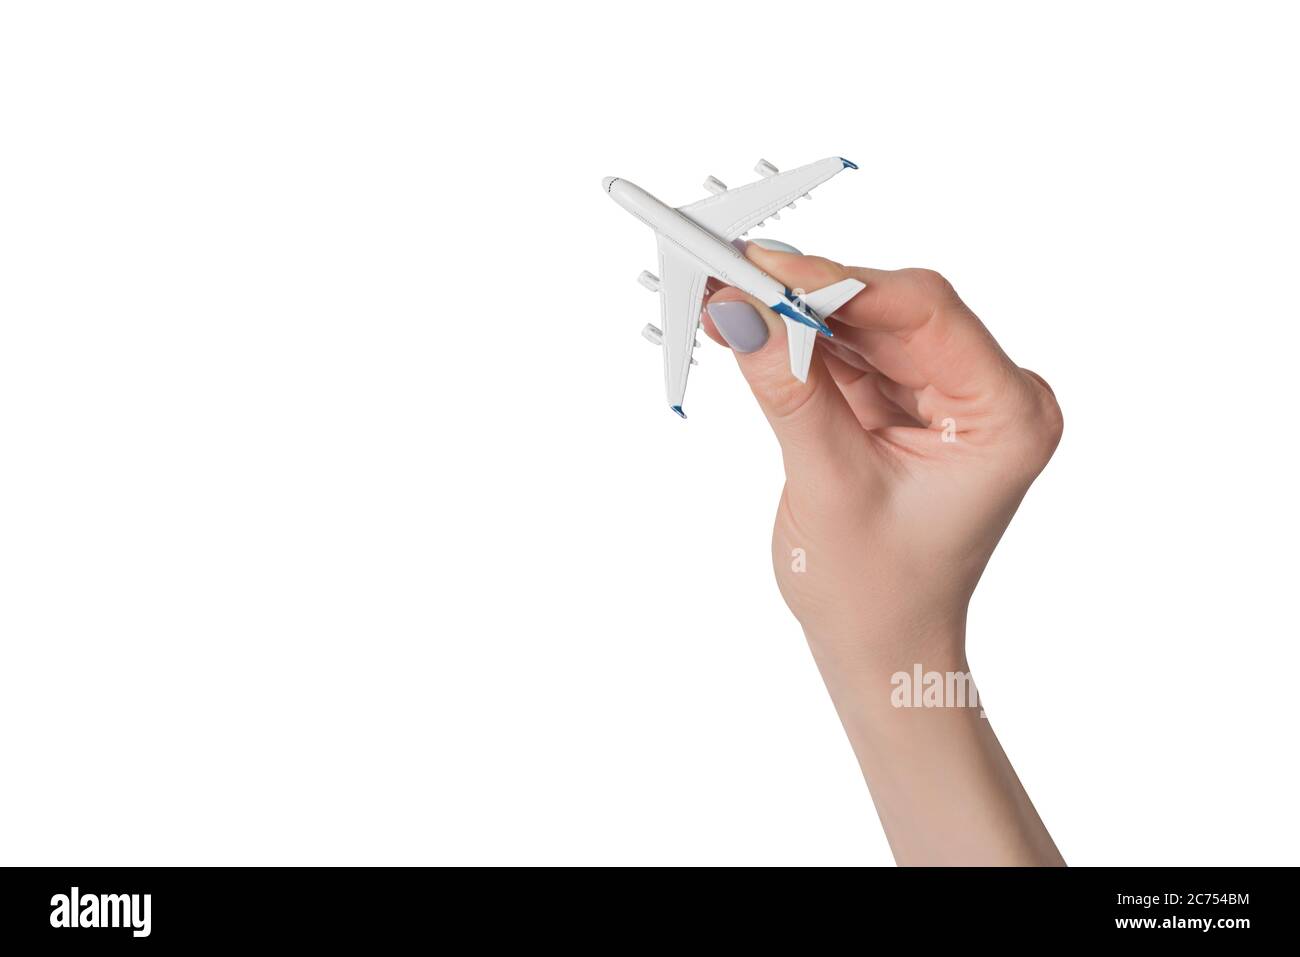 Passenger plane in female hand isolate on white background. Concept of safe flights. Stock Photo